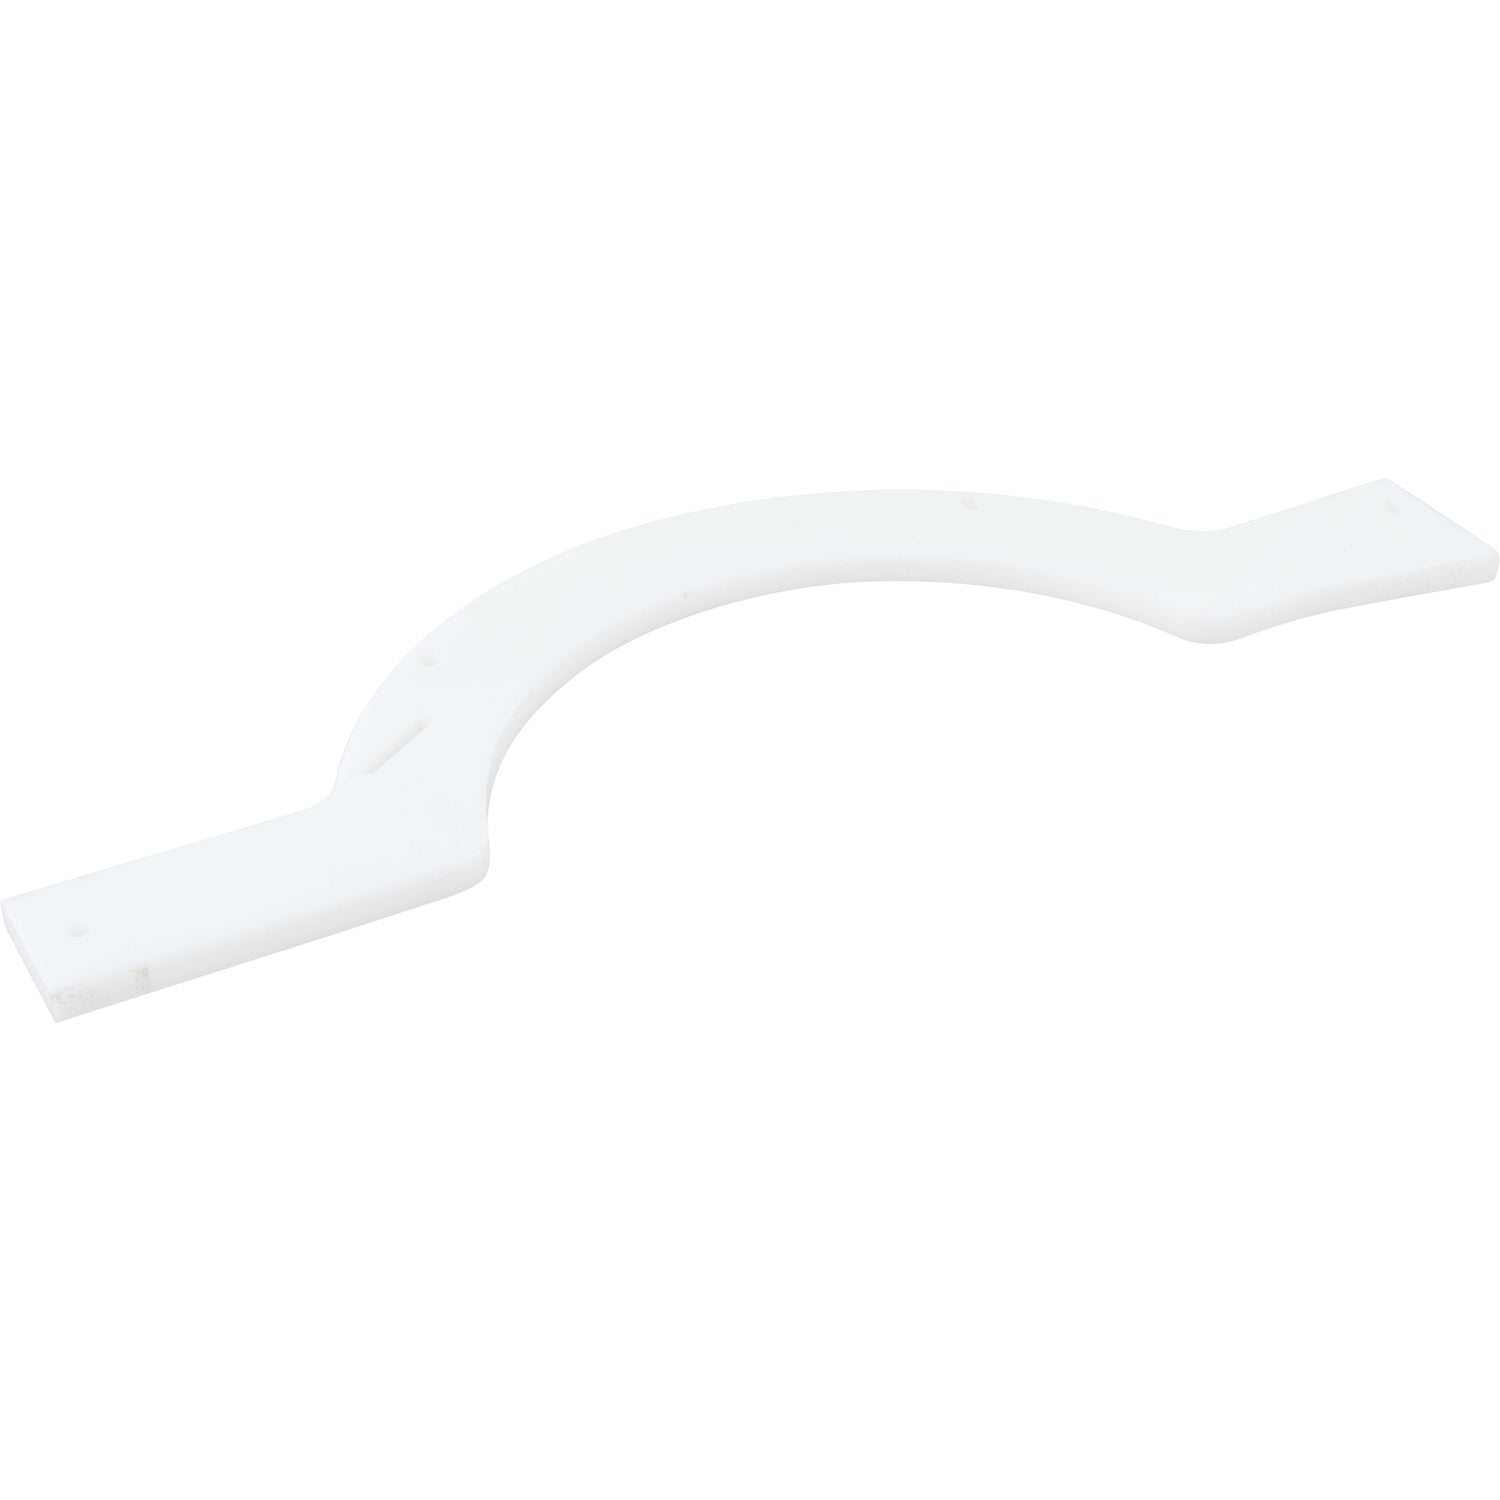 White, flat, curved rail made of HDPE with through holes on white background.